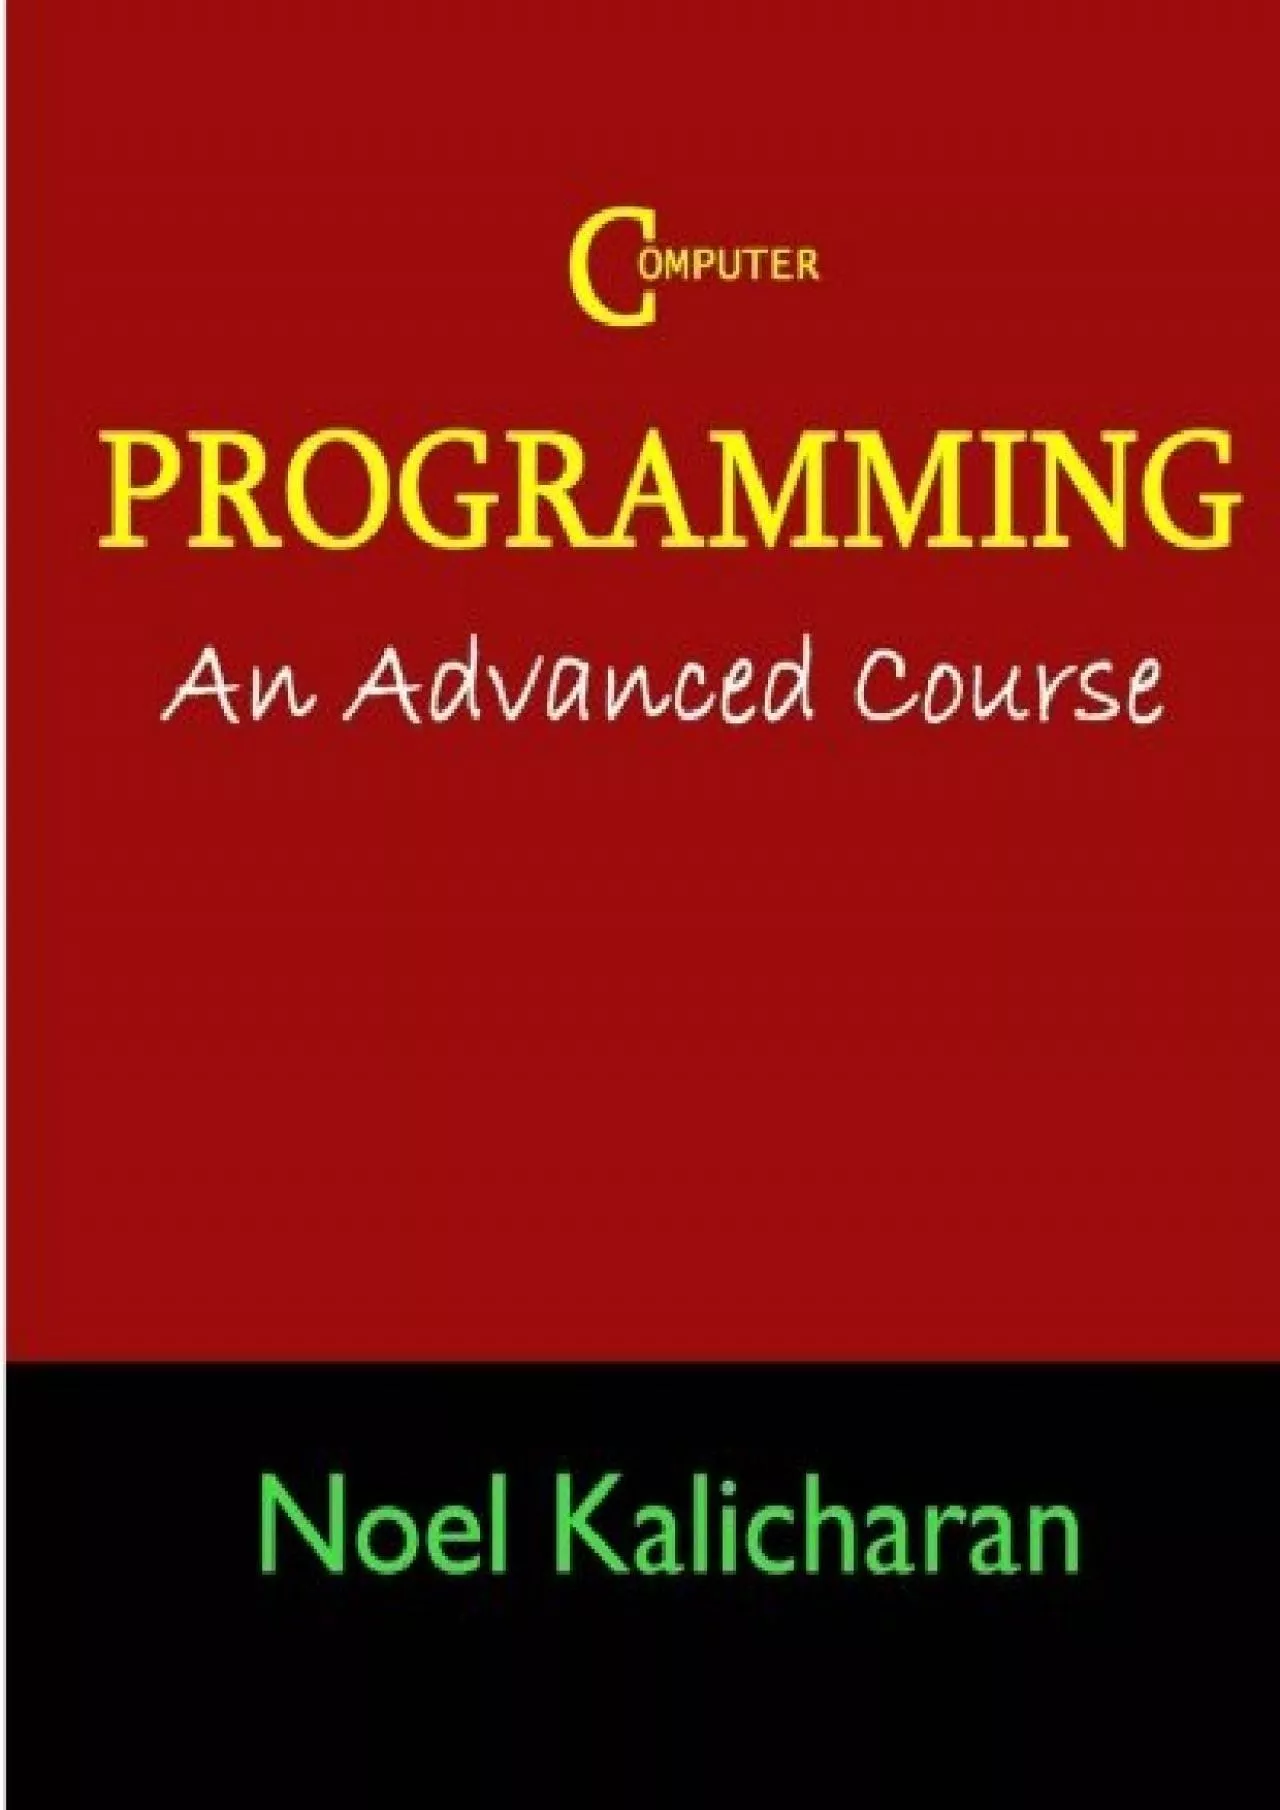 [READING BOOK]-C Programming - An Advanced Course